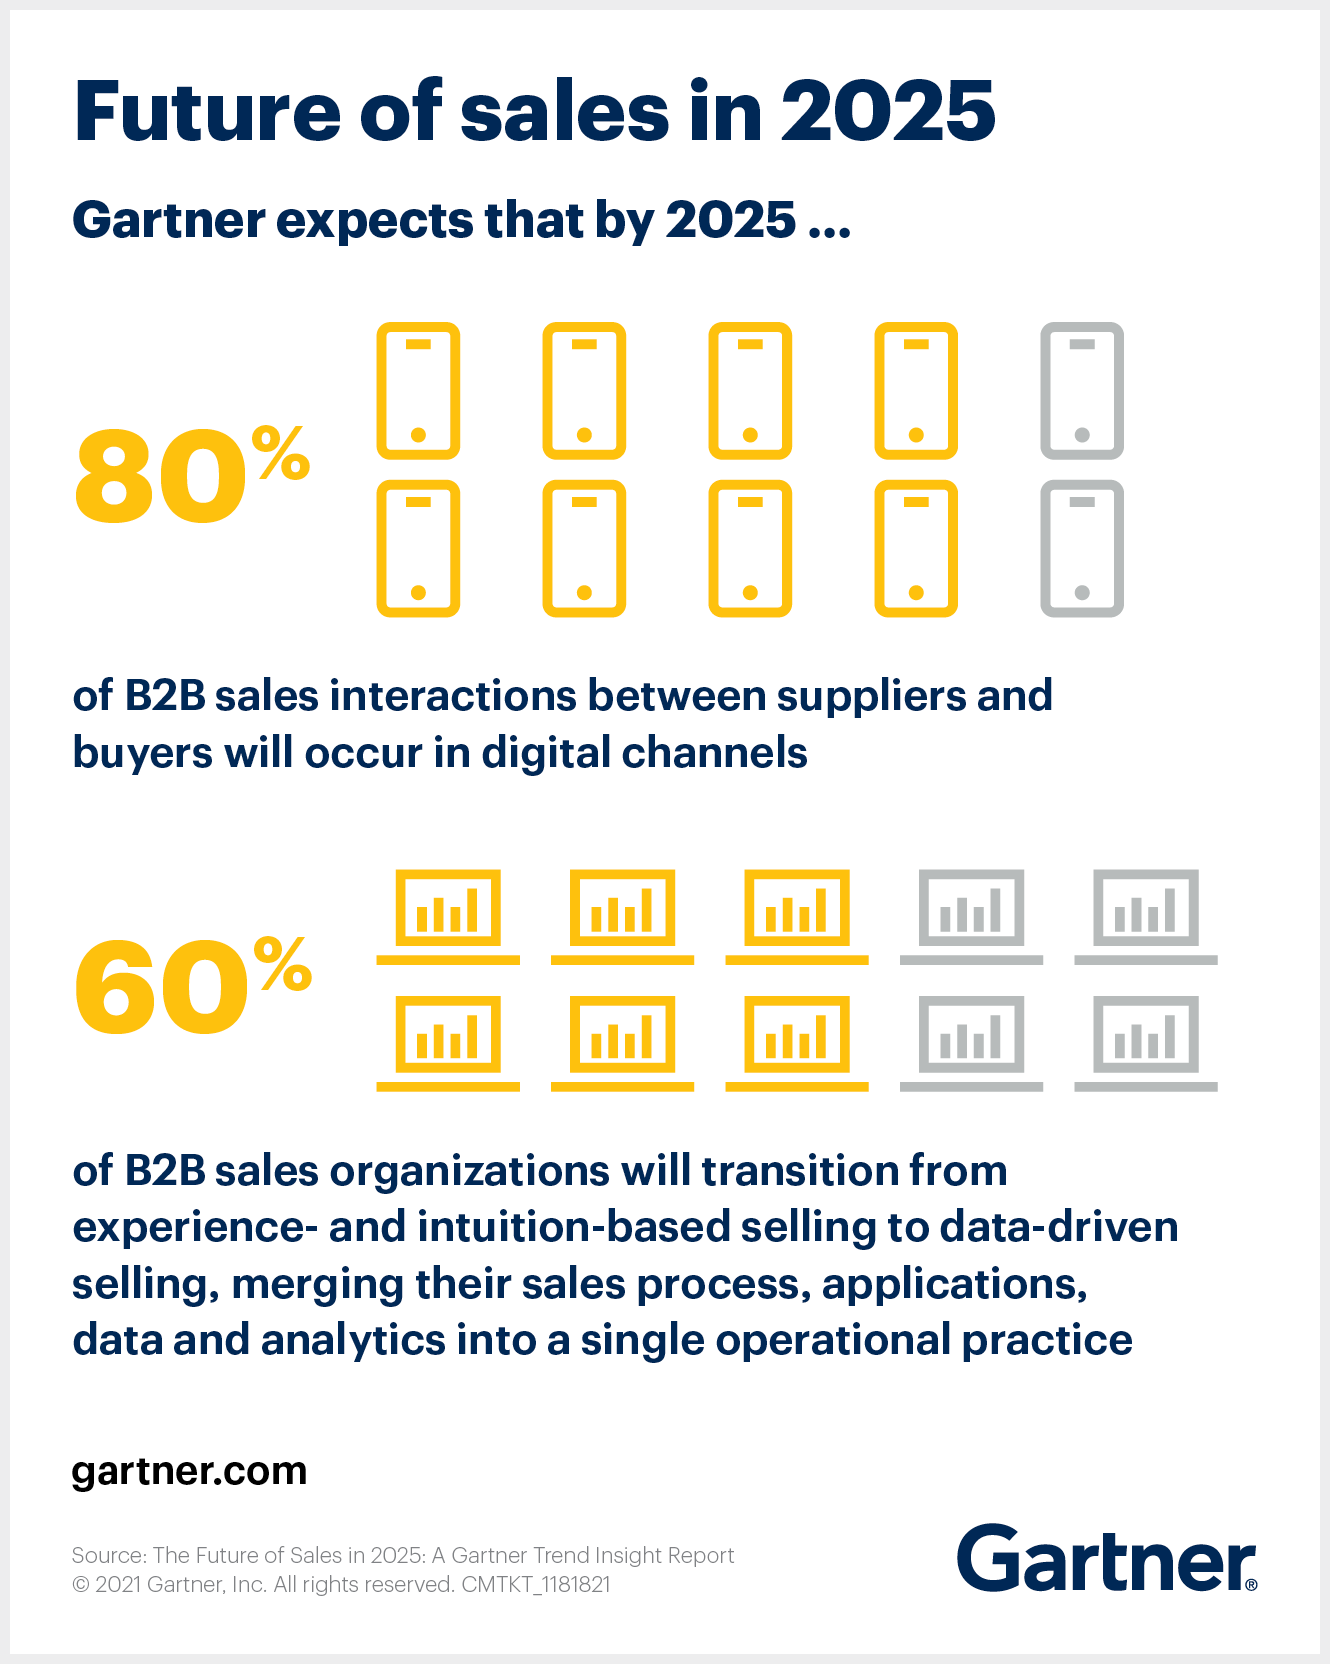 Future of B2B sales is more digital and data driven.